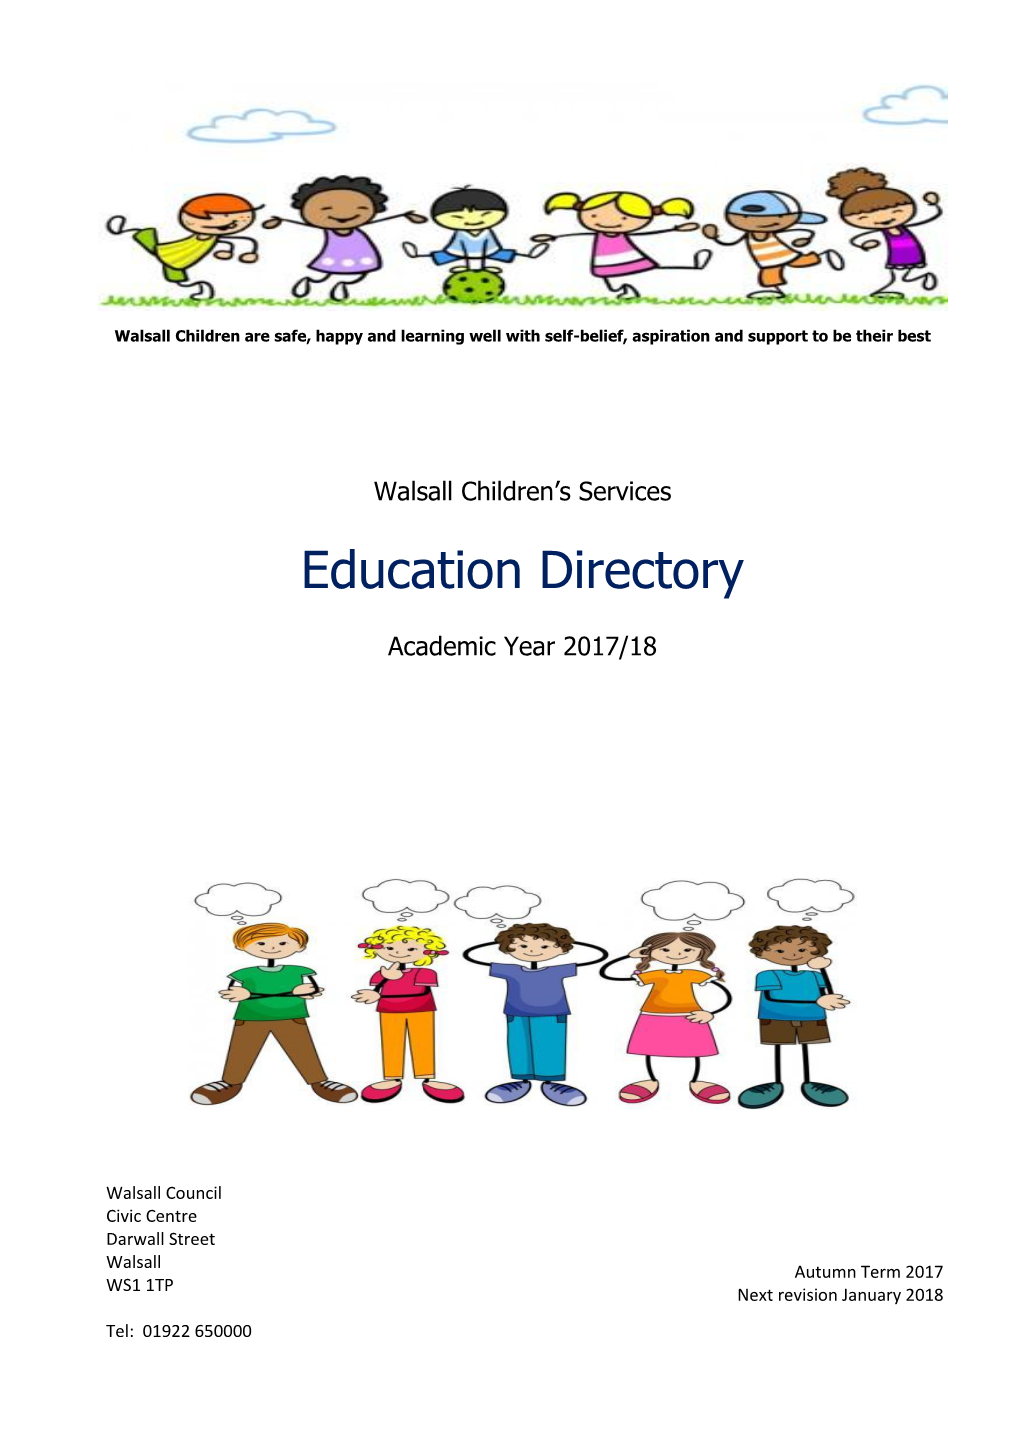 Education Directory